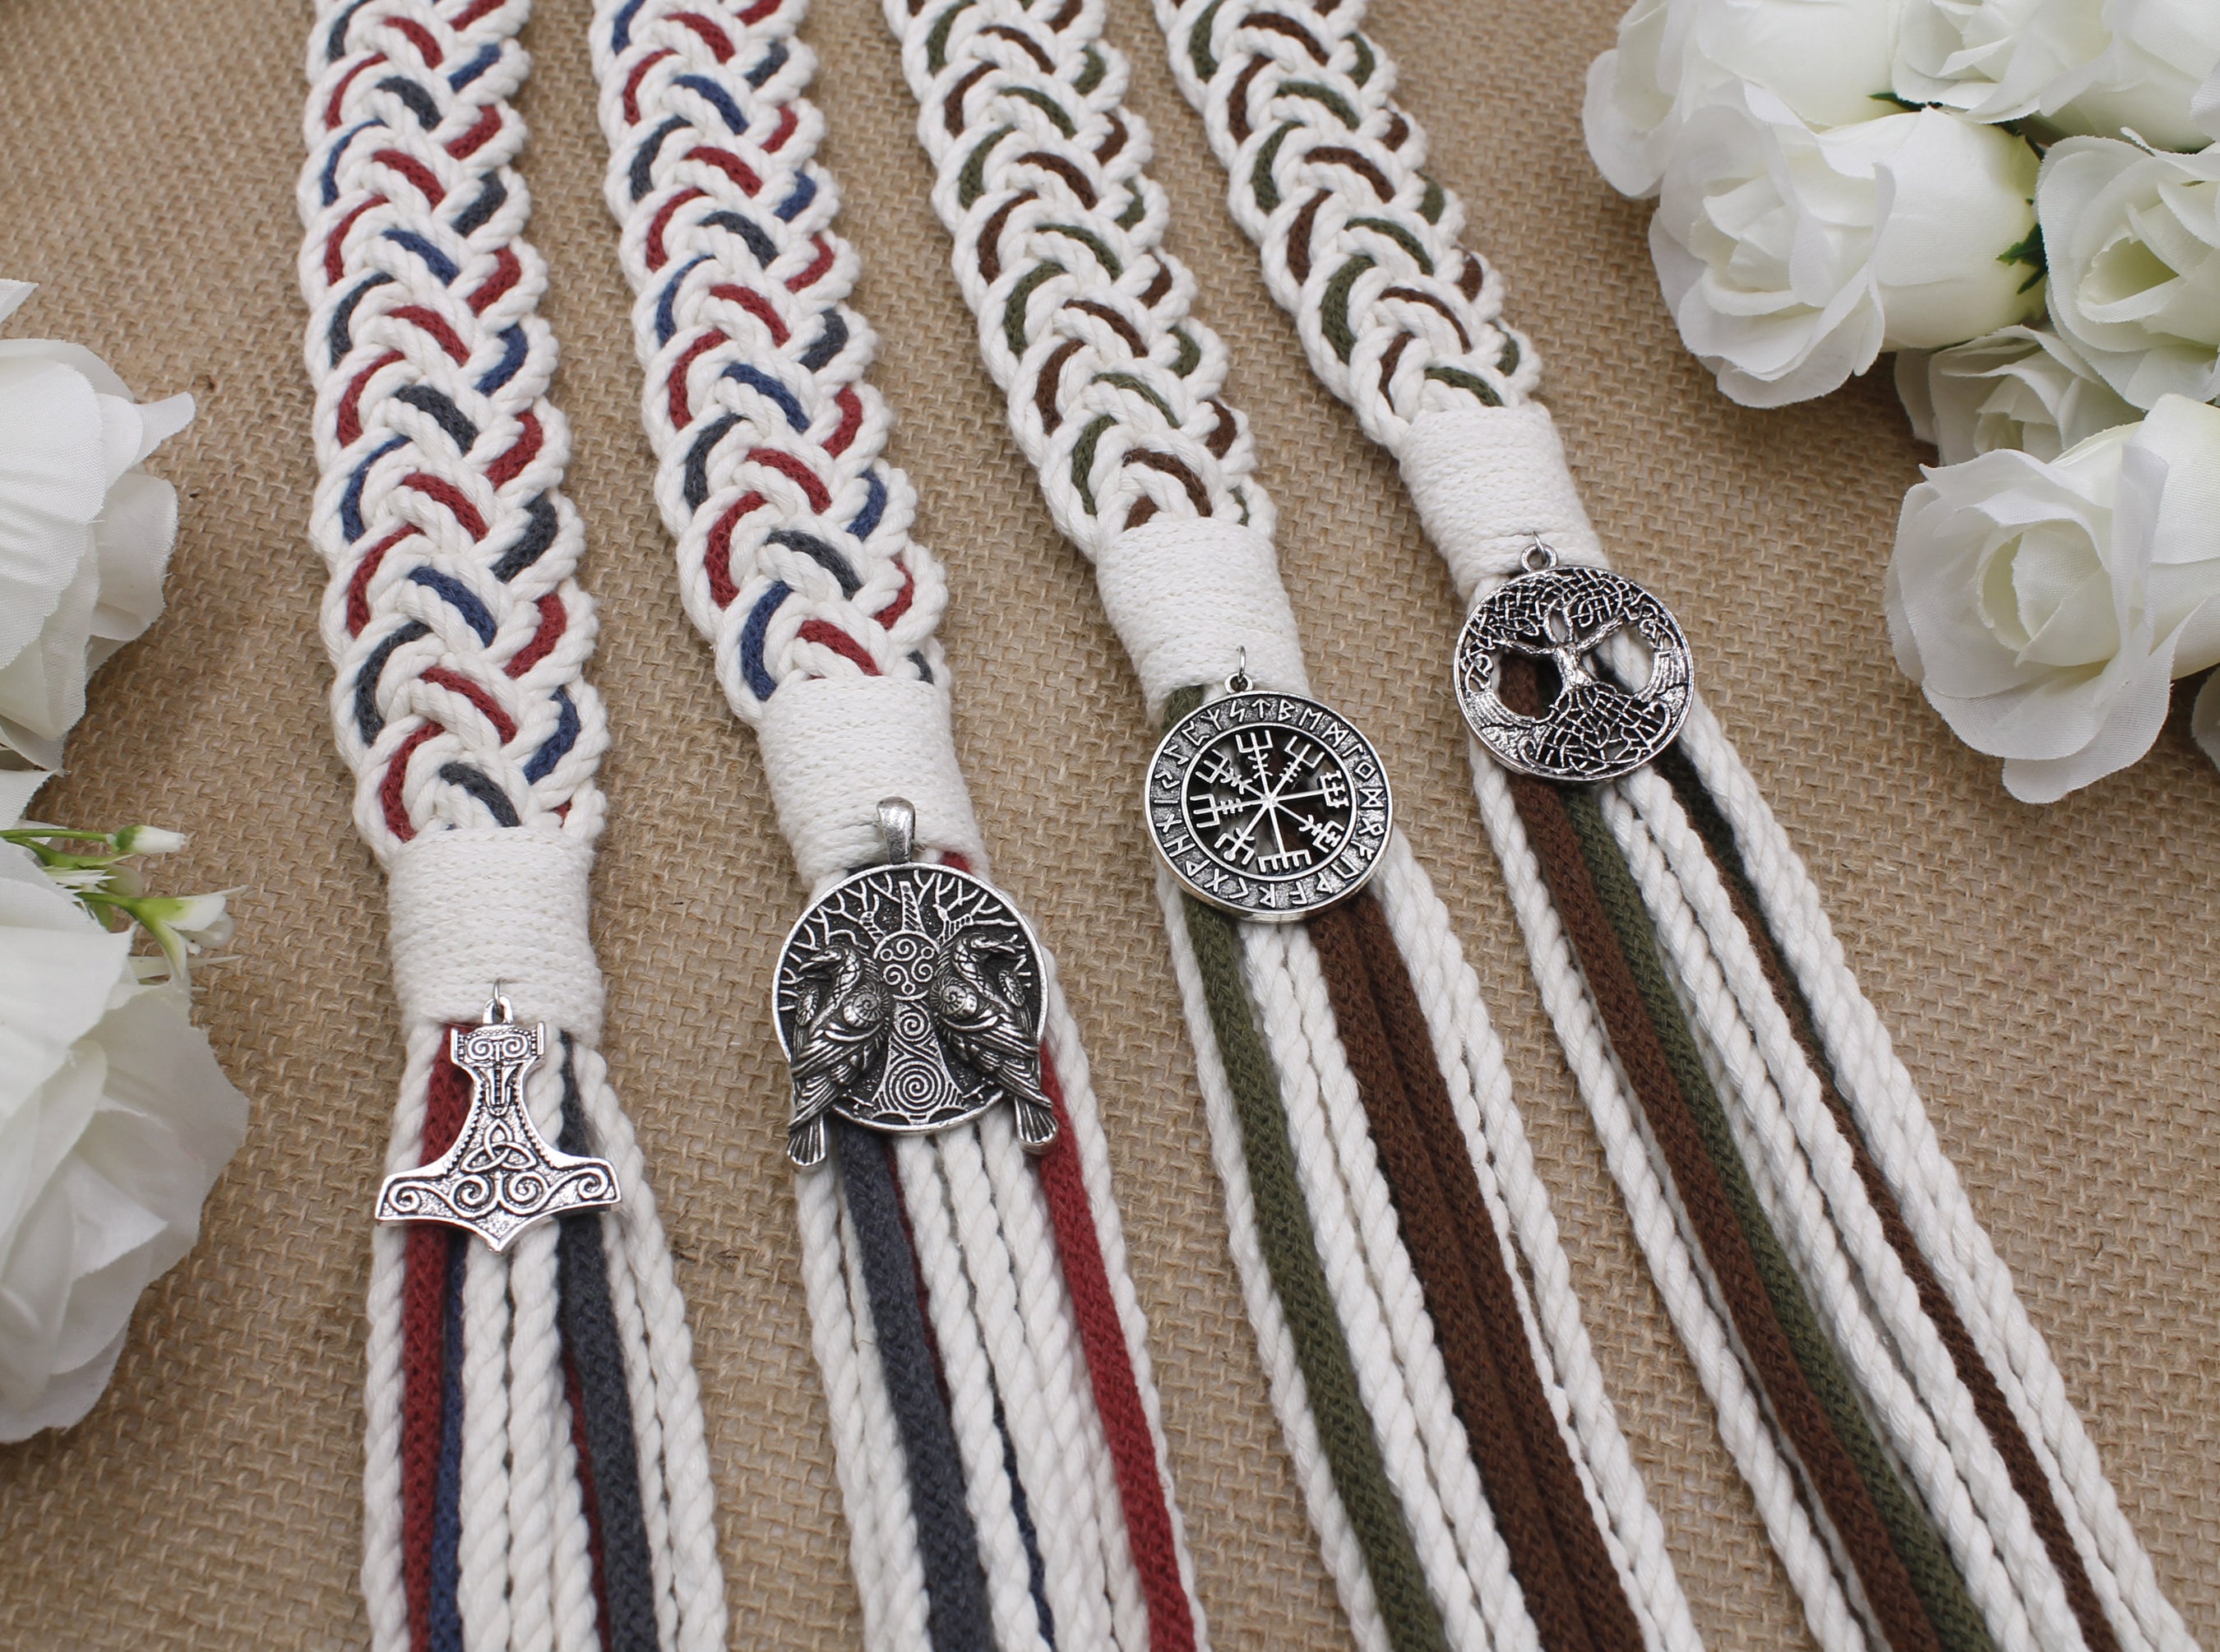 Handfasting Cords by Embracing Cords - Reviews